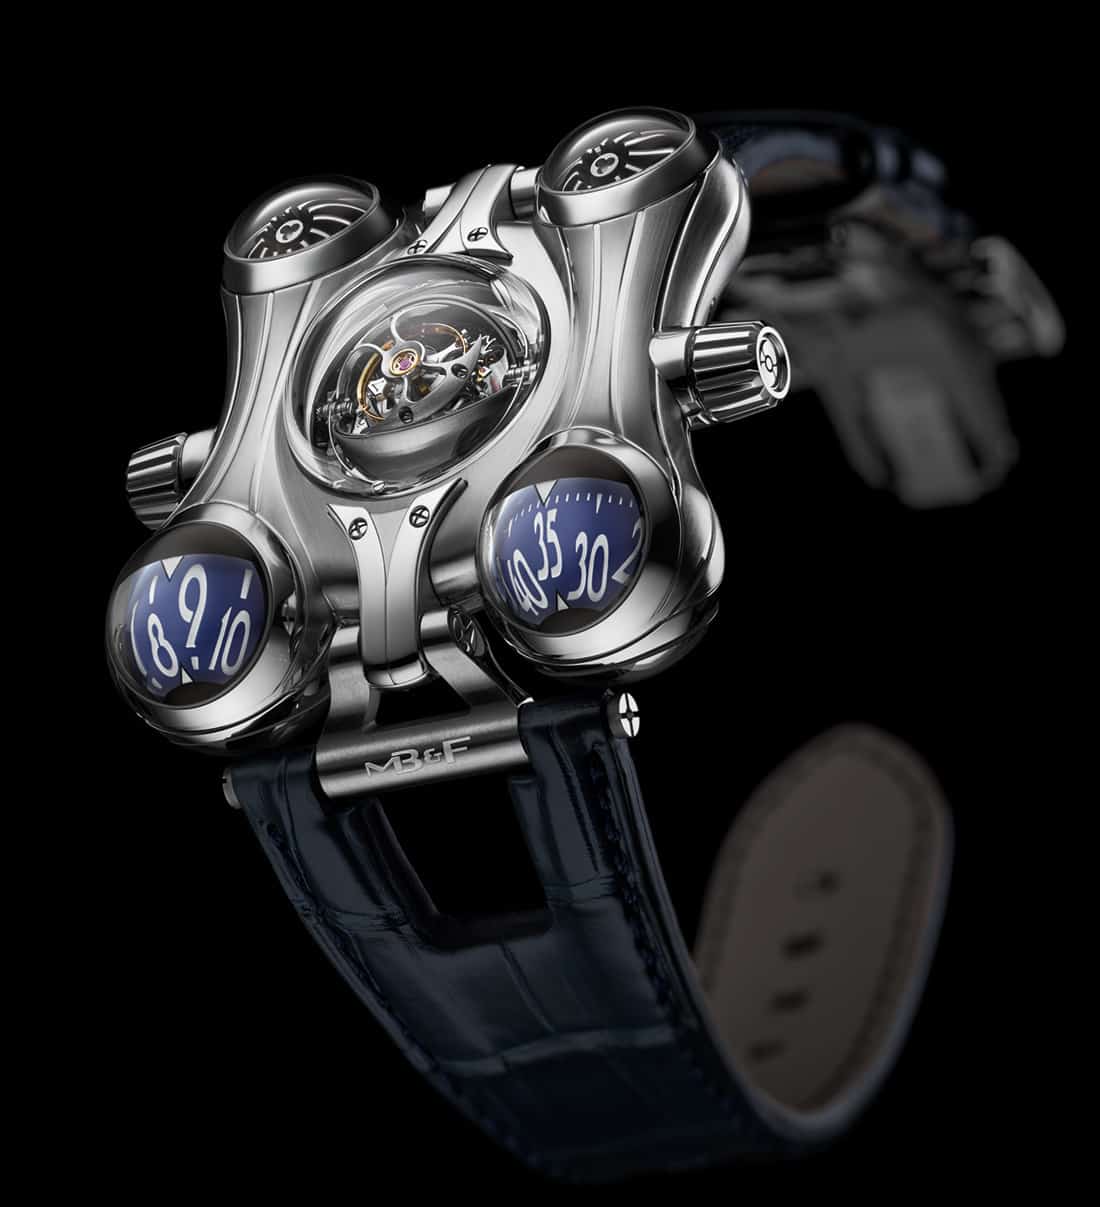 MB&F HM6 Final Edition